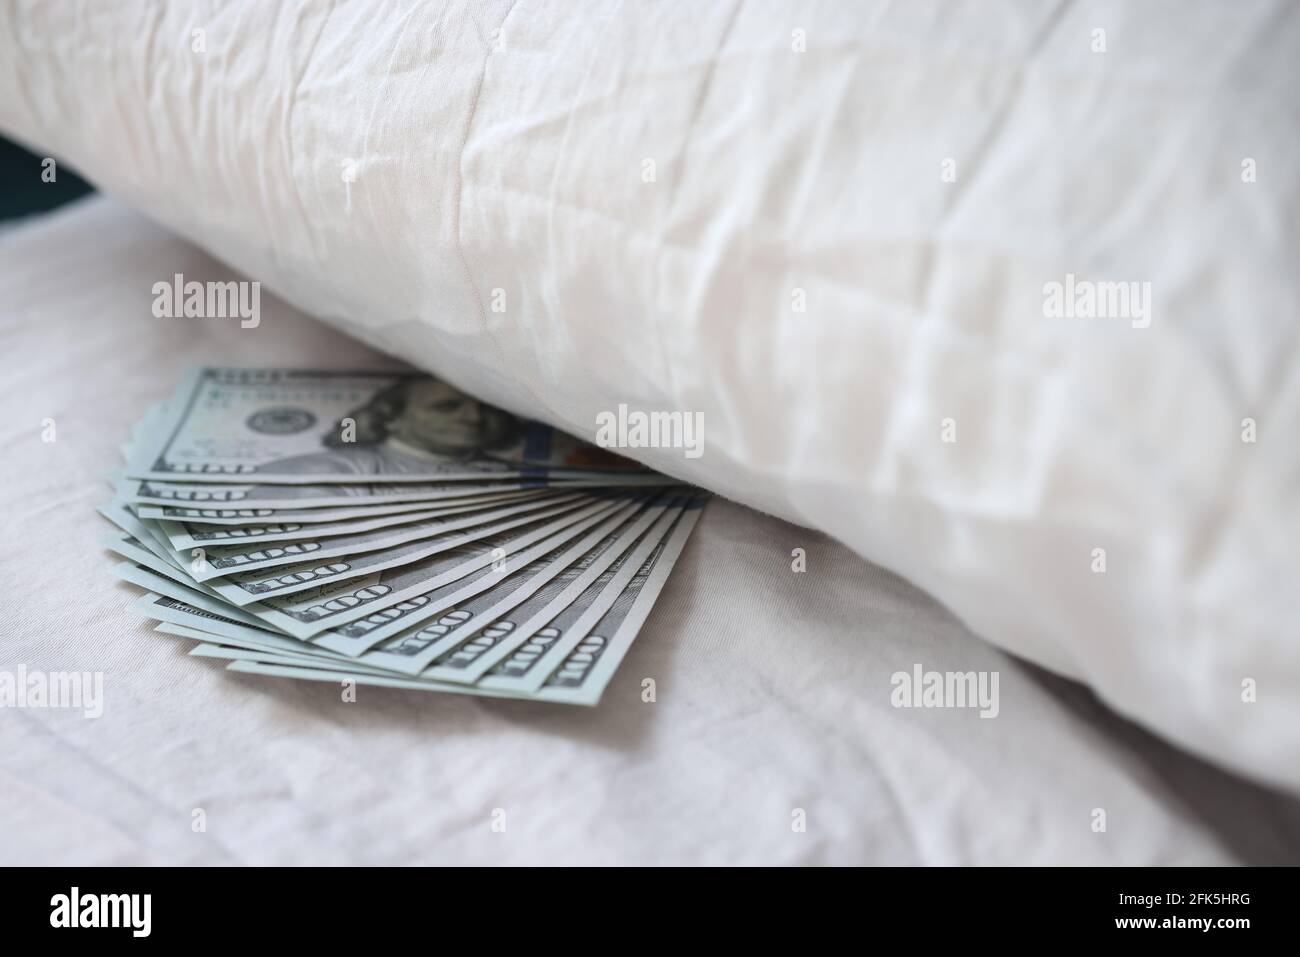 Lot of american dollars lying under pillow in bedroom closeup Stock Photo